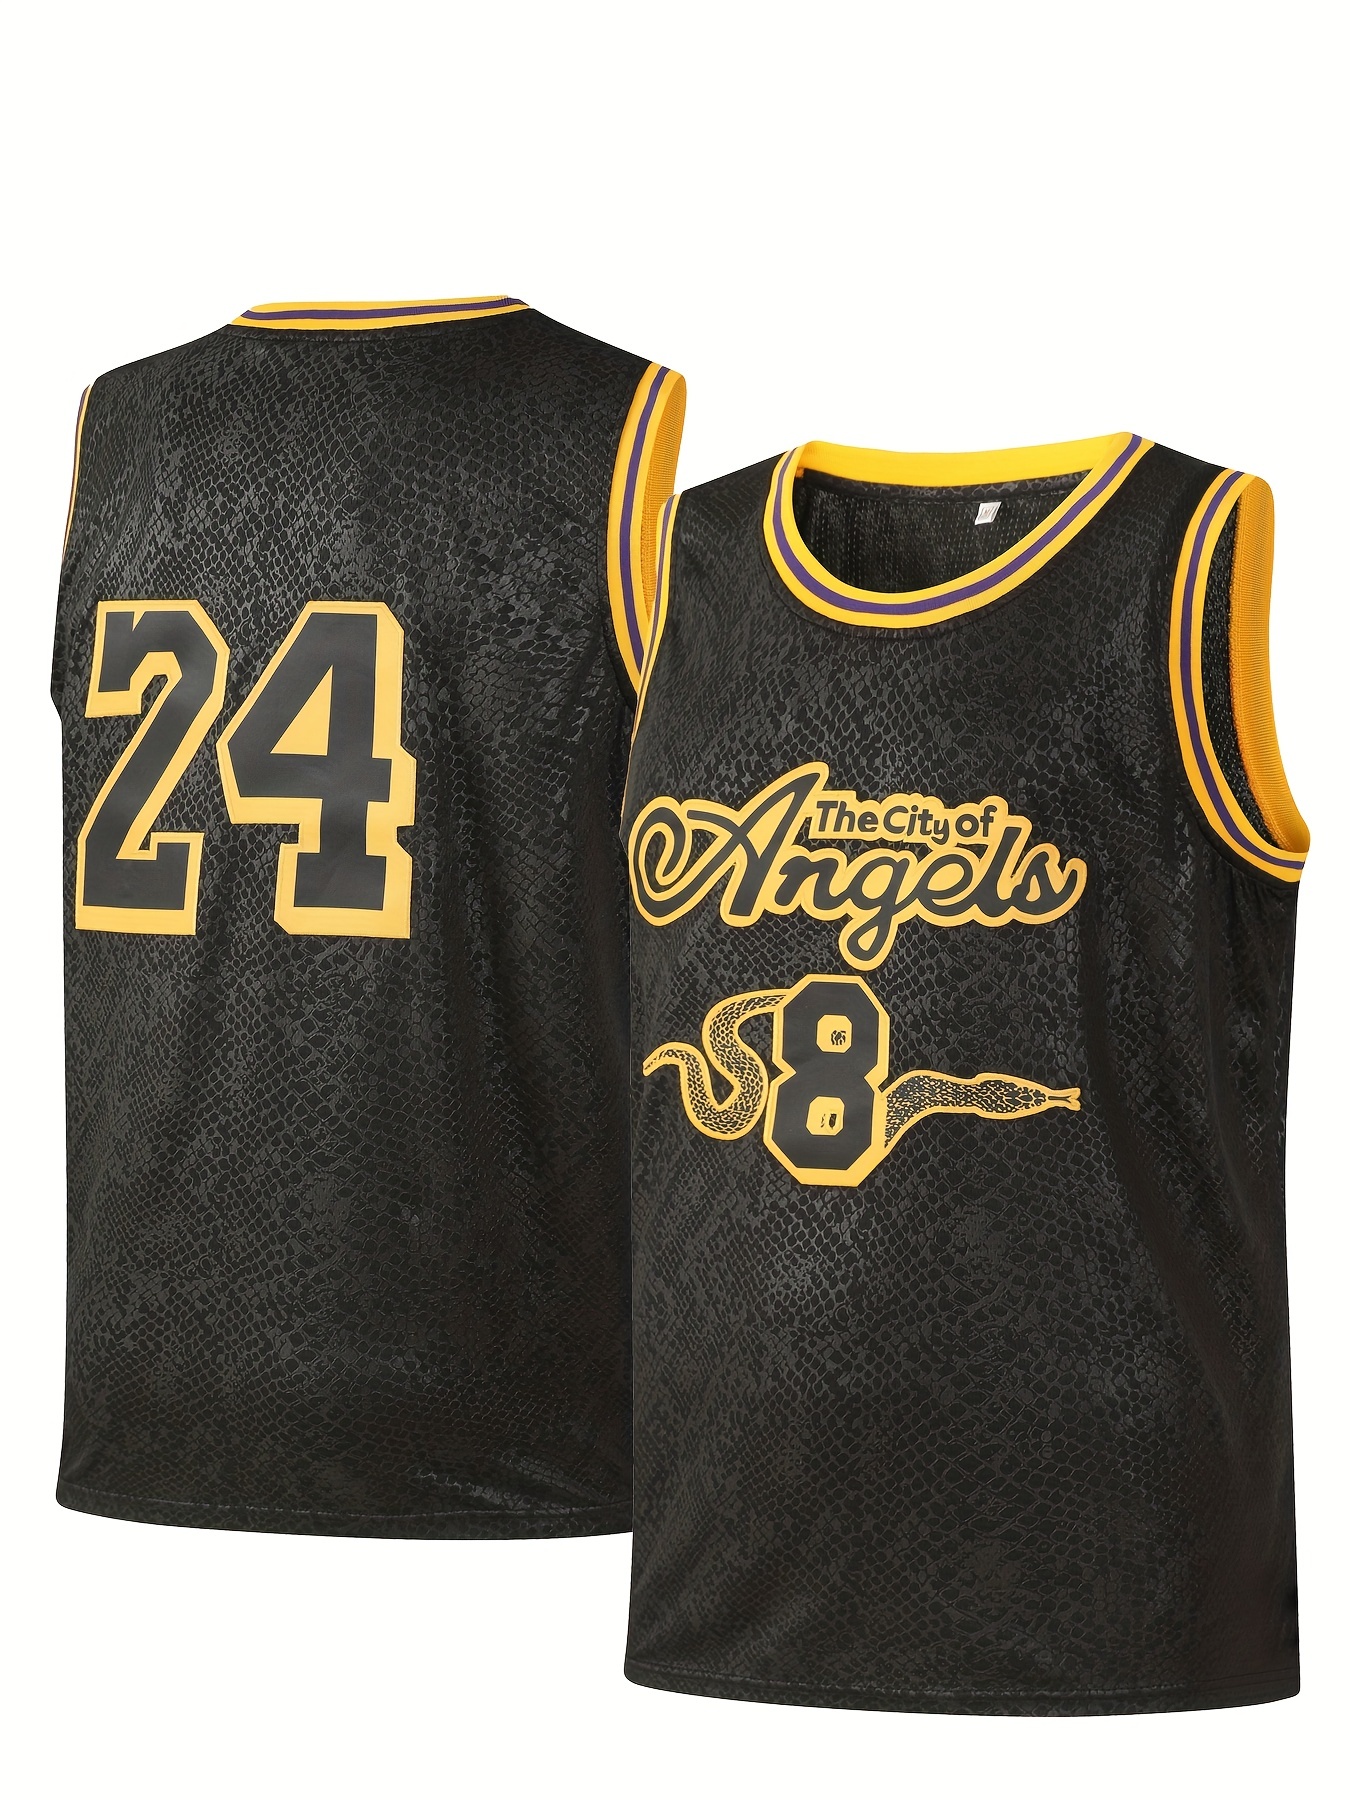 JERSEY ANGELS YOUTH BASKETBALL